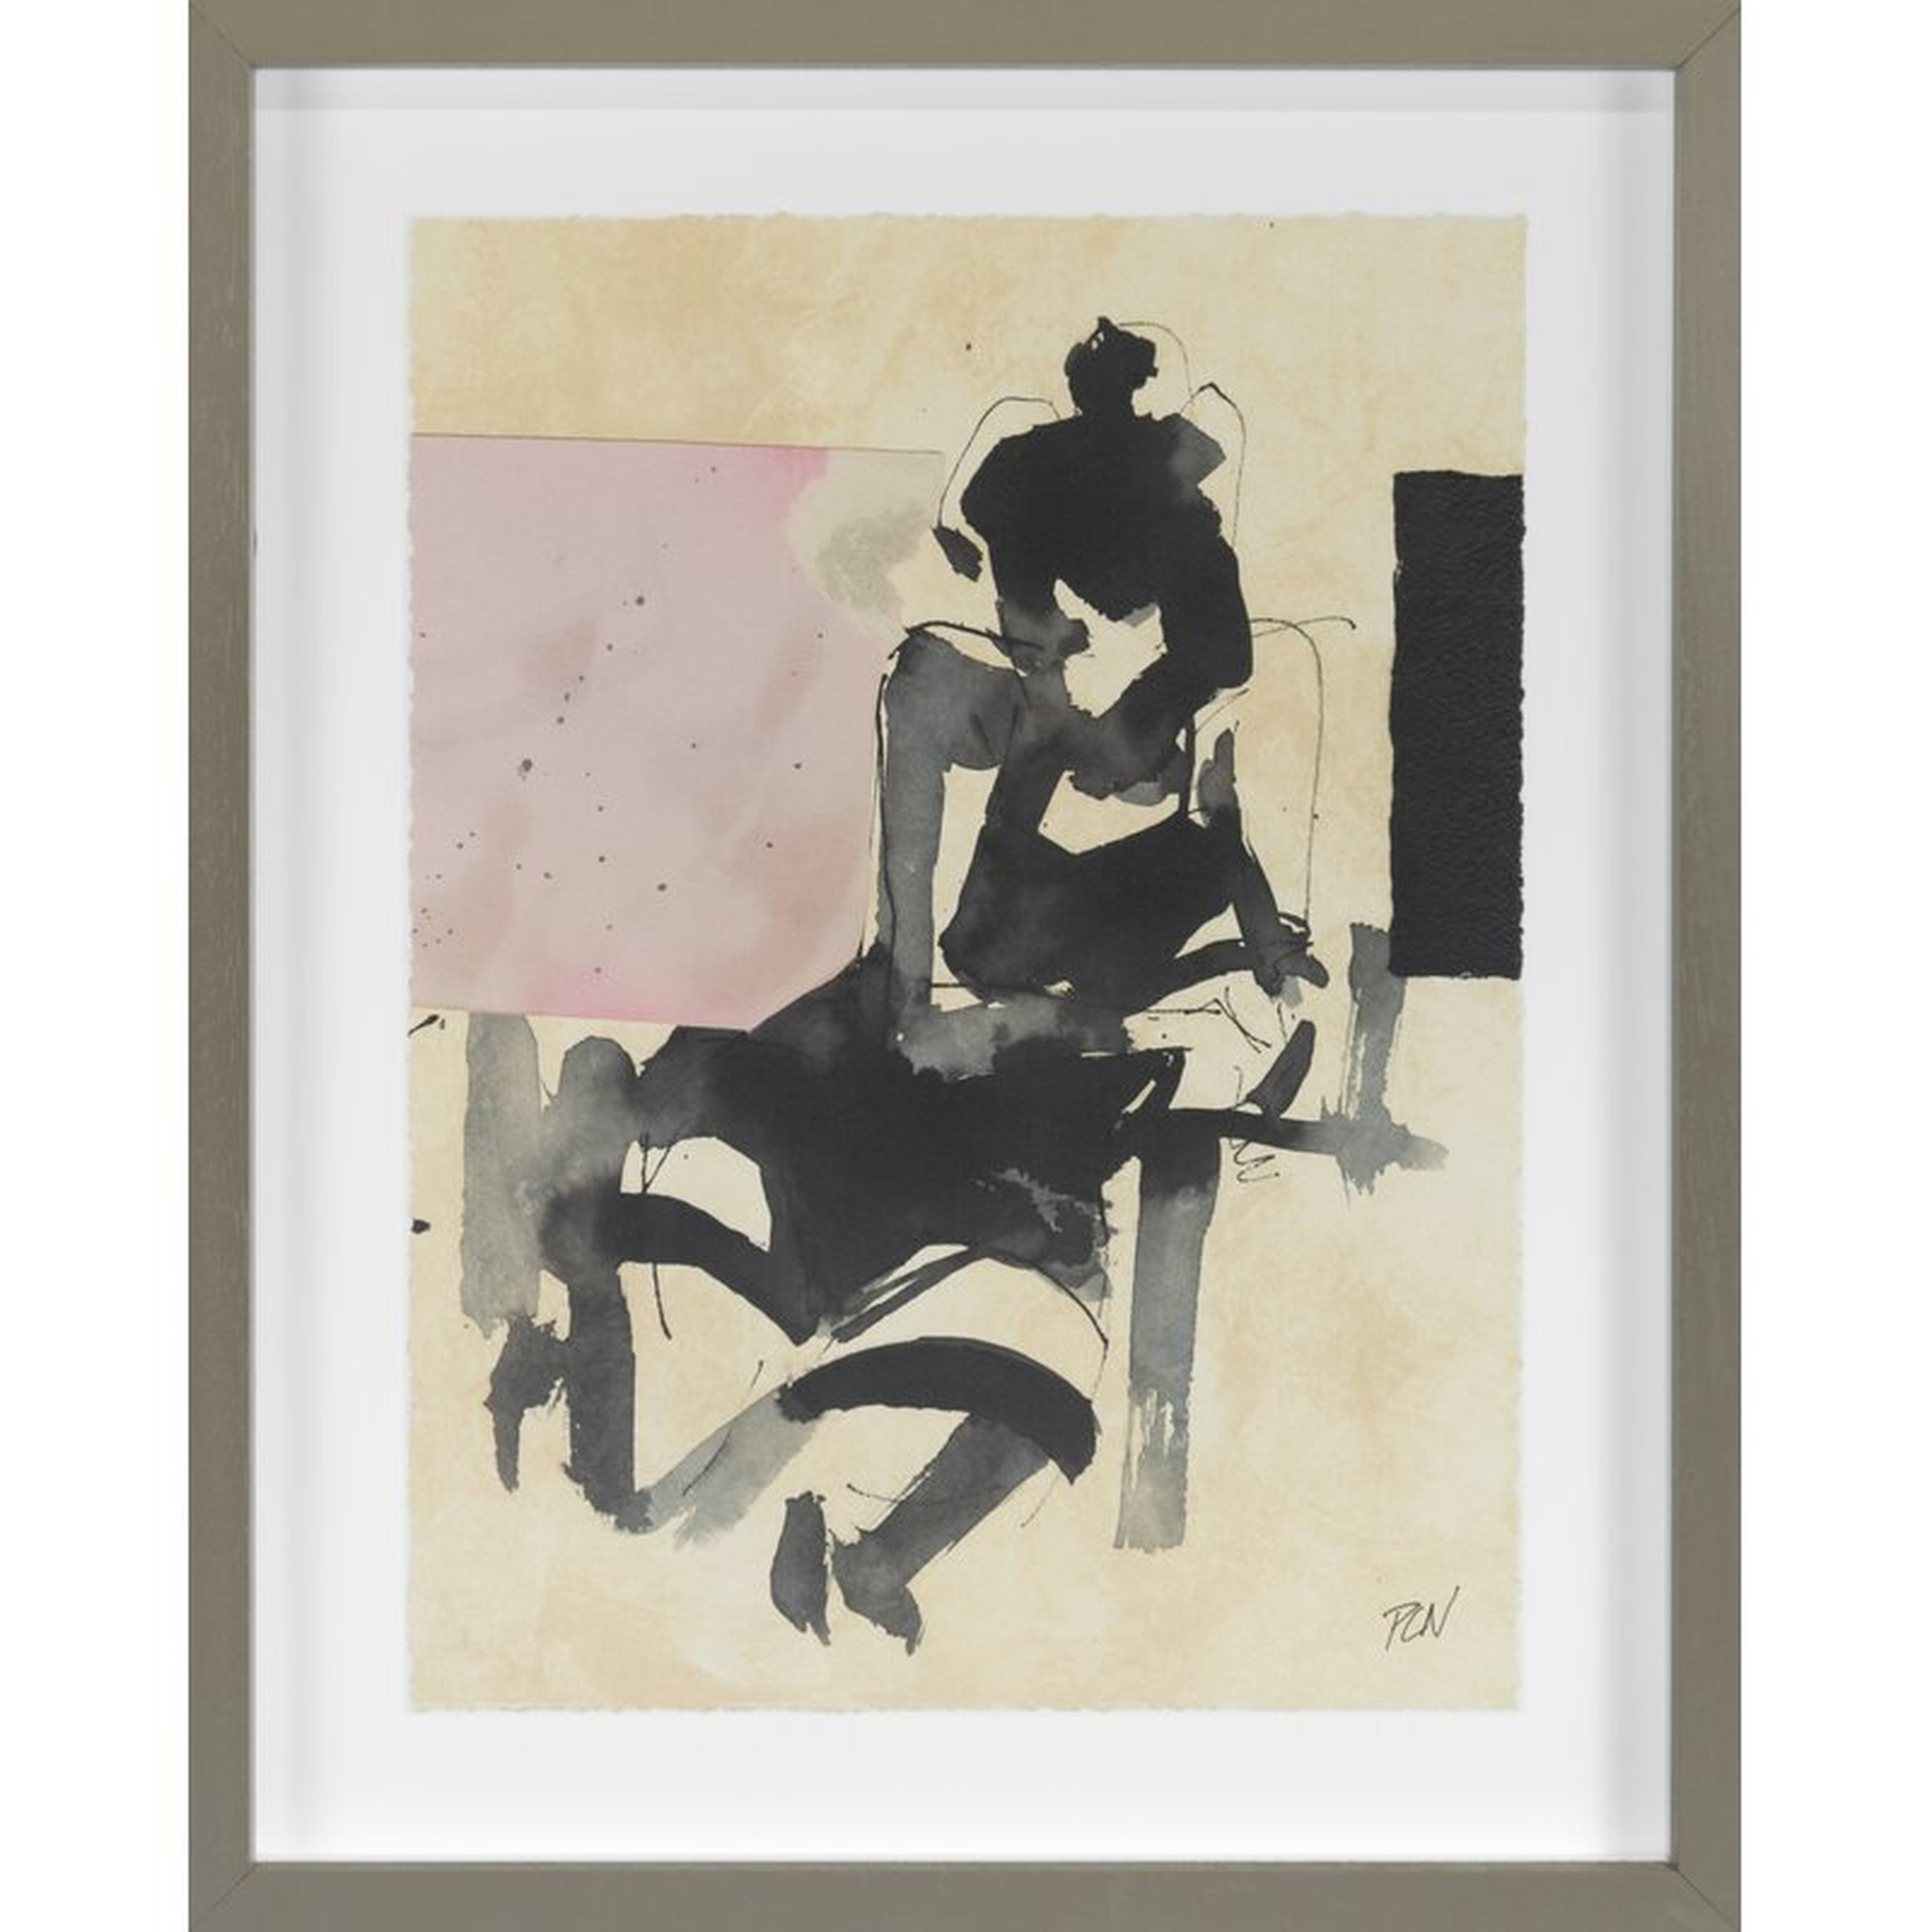 Grand Image Home 'Y-Nudes II' by PC Ngo - Picture Frame Print on Paper Size: 29" H x 23" W x 2" D - Perigold